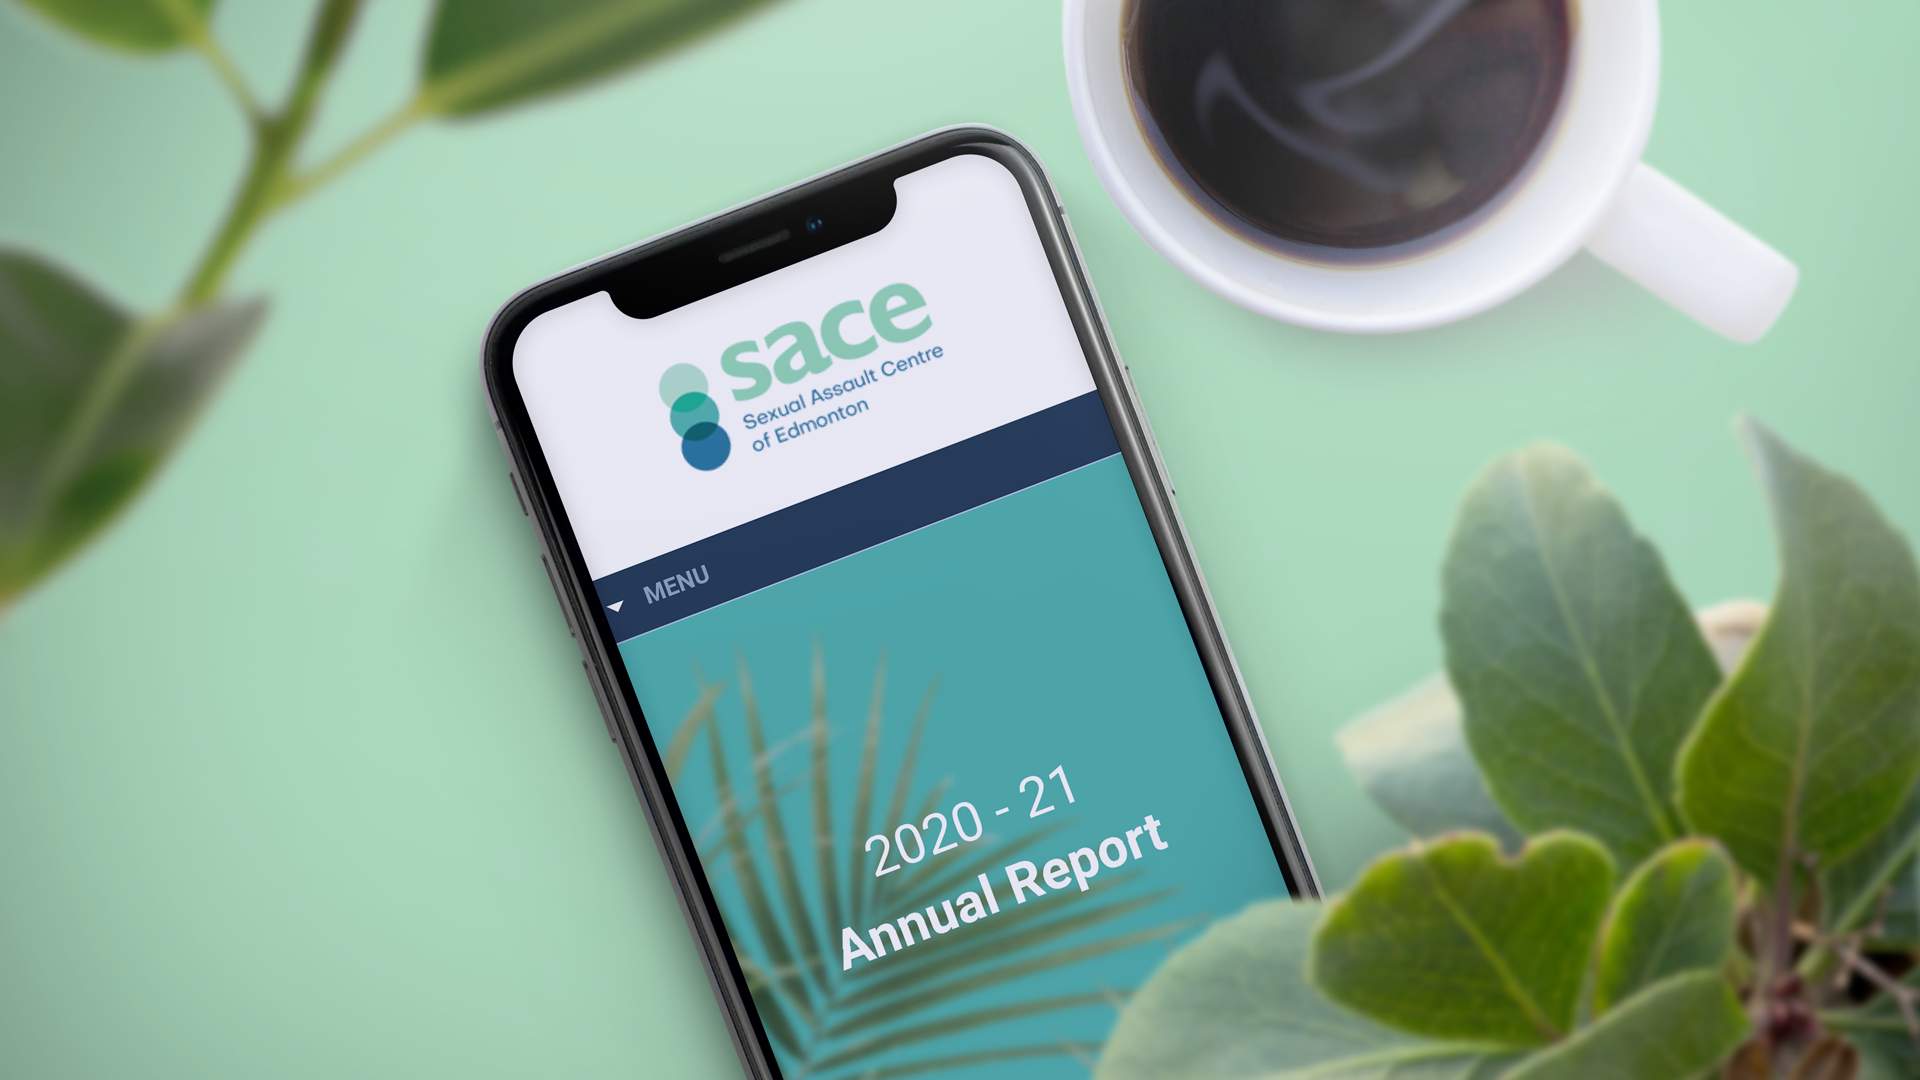 A cell phone displaying the 2020-2021 SACE Annual Report from the website on a mint green background, plants and a cup of coffee.